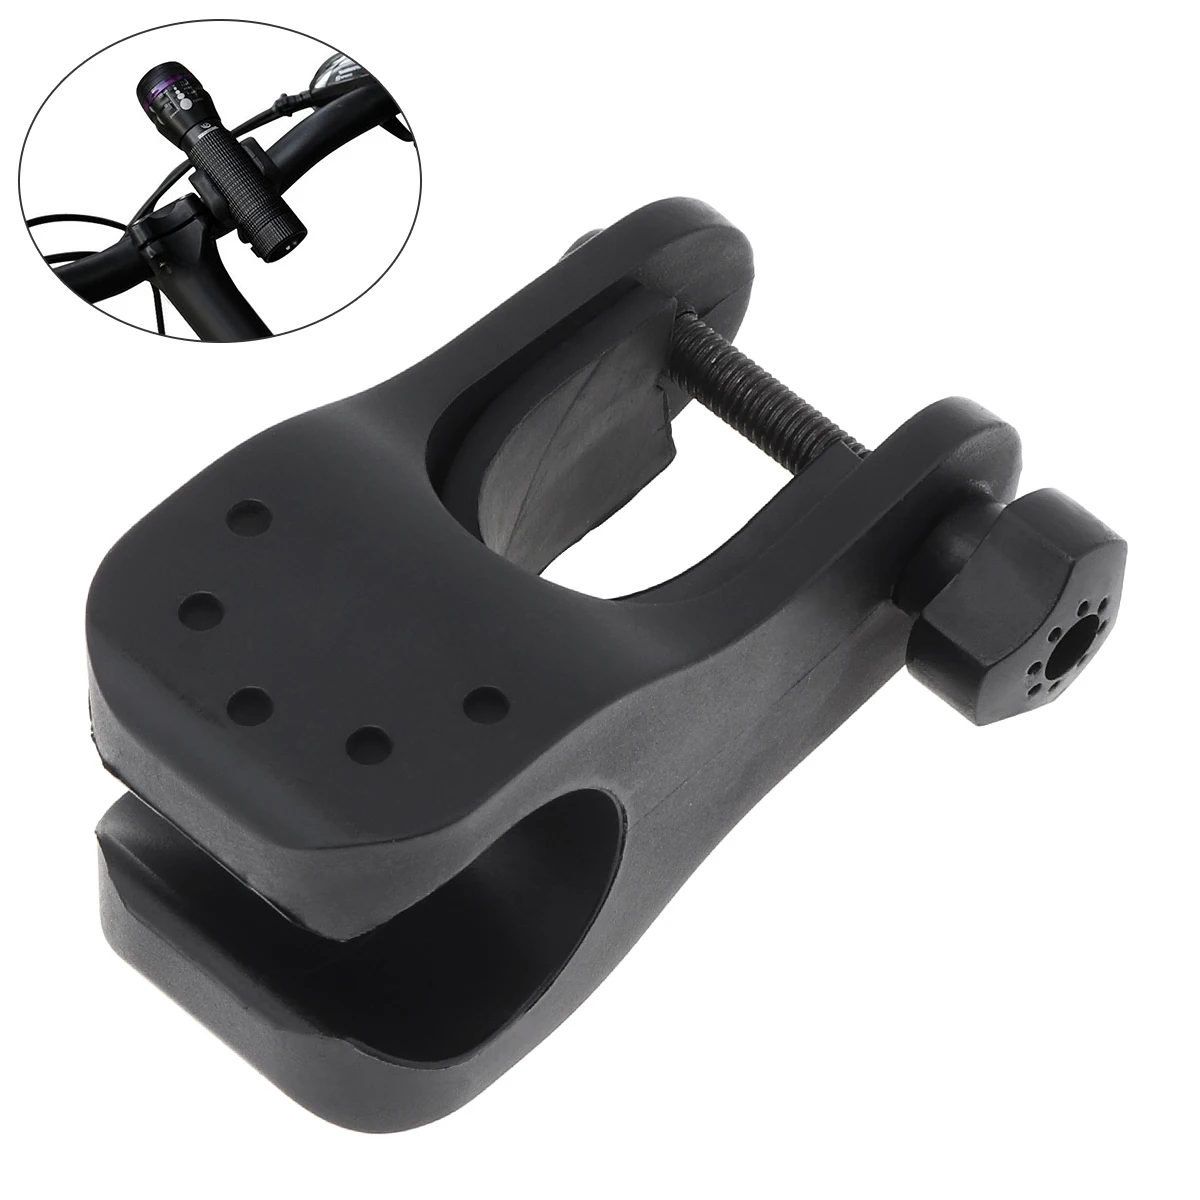 Shatterproof Bicycle Cycle Light Stand Bike Front Mount LED Headlight Holder Clip Rubber for 22-35mm Diameter Flashlight 0 5x c mount lens adapter 35mm diameter field for simul focal trinocular stereo microscope video camera